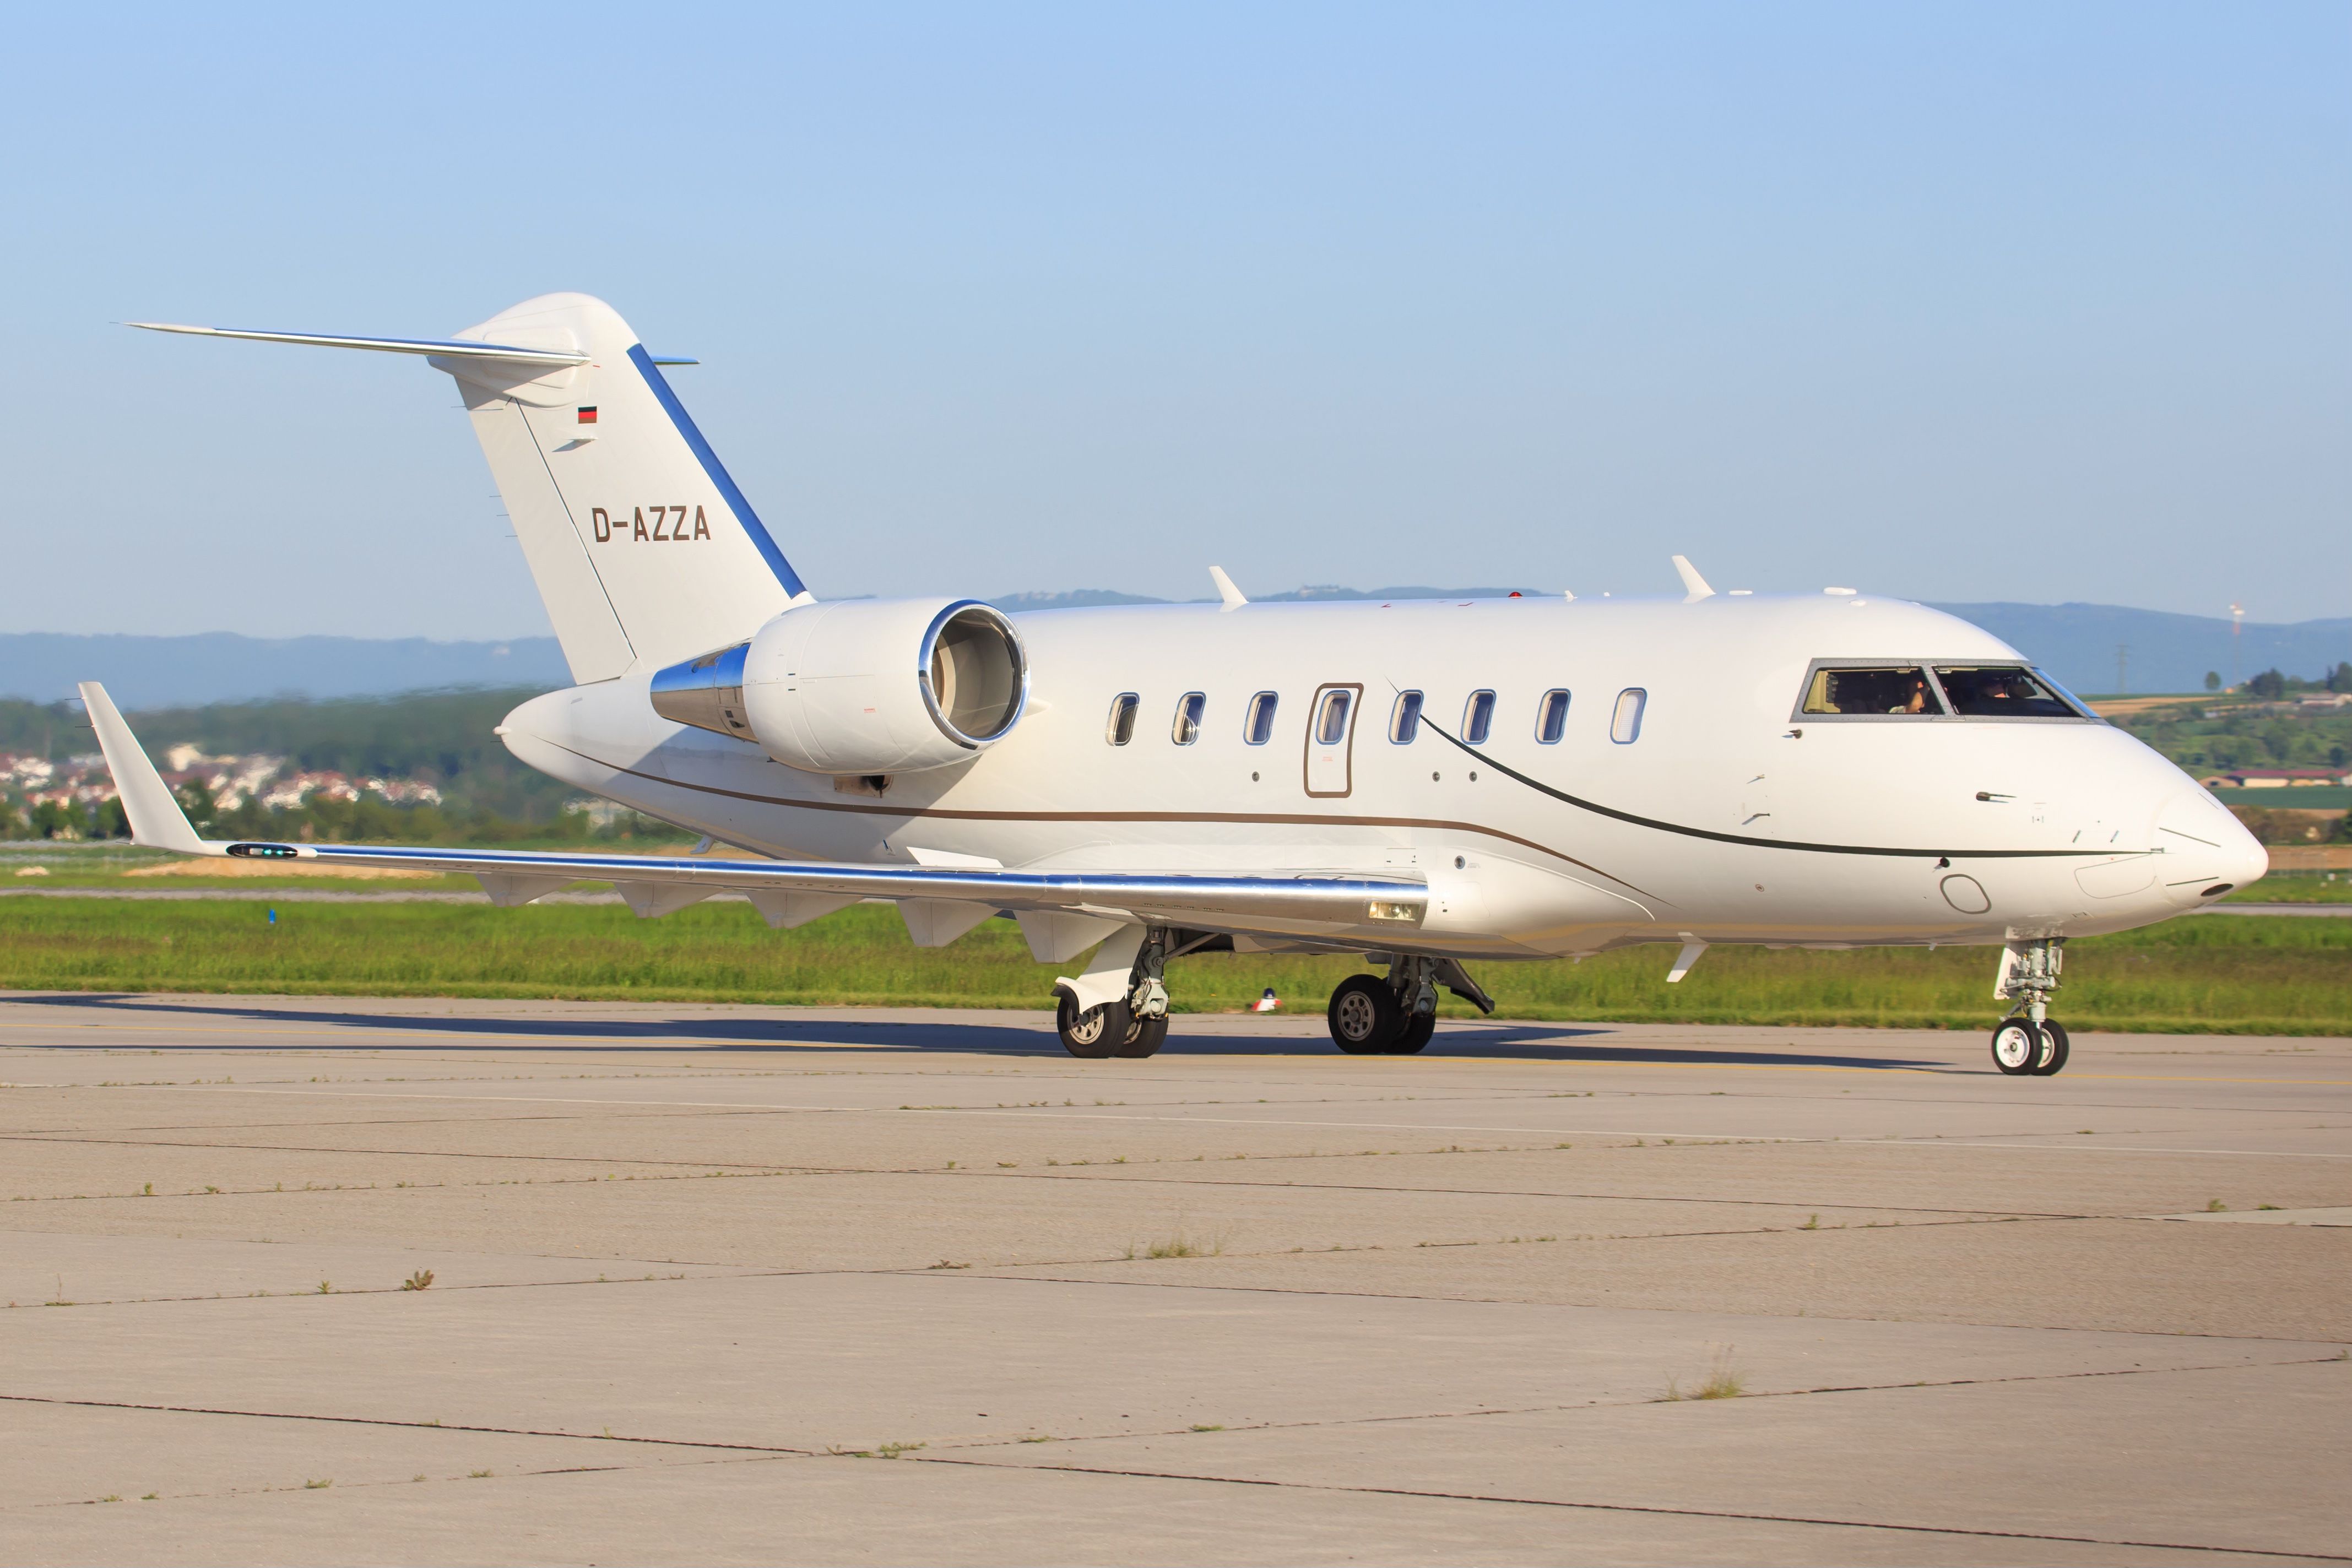 A Bombardier Challenger 600 on an airport apron.